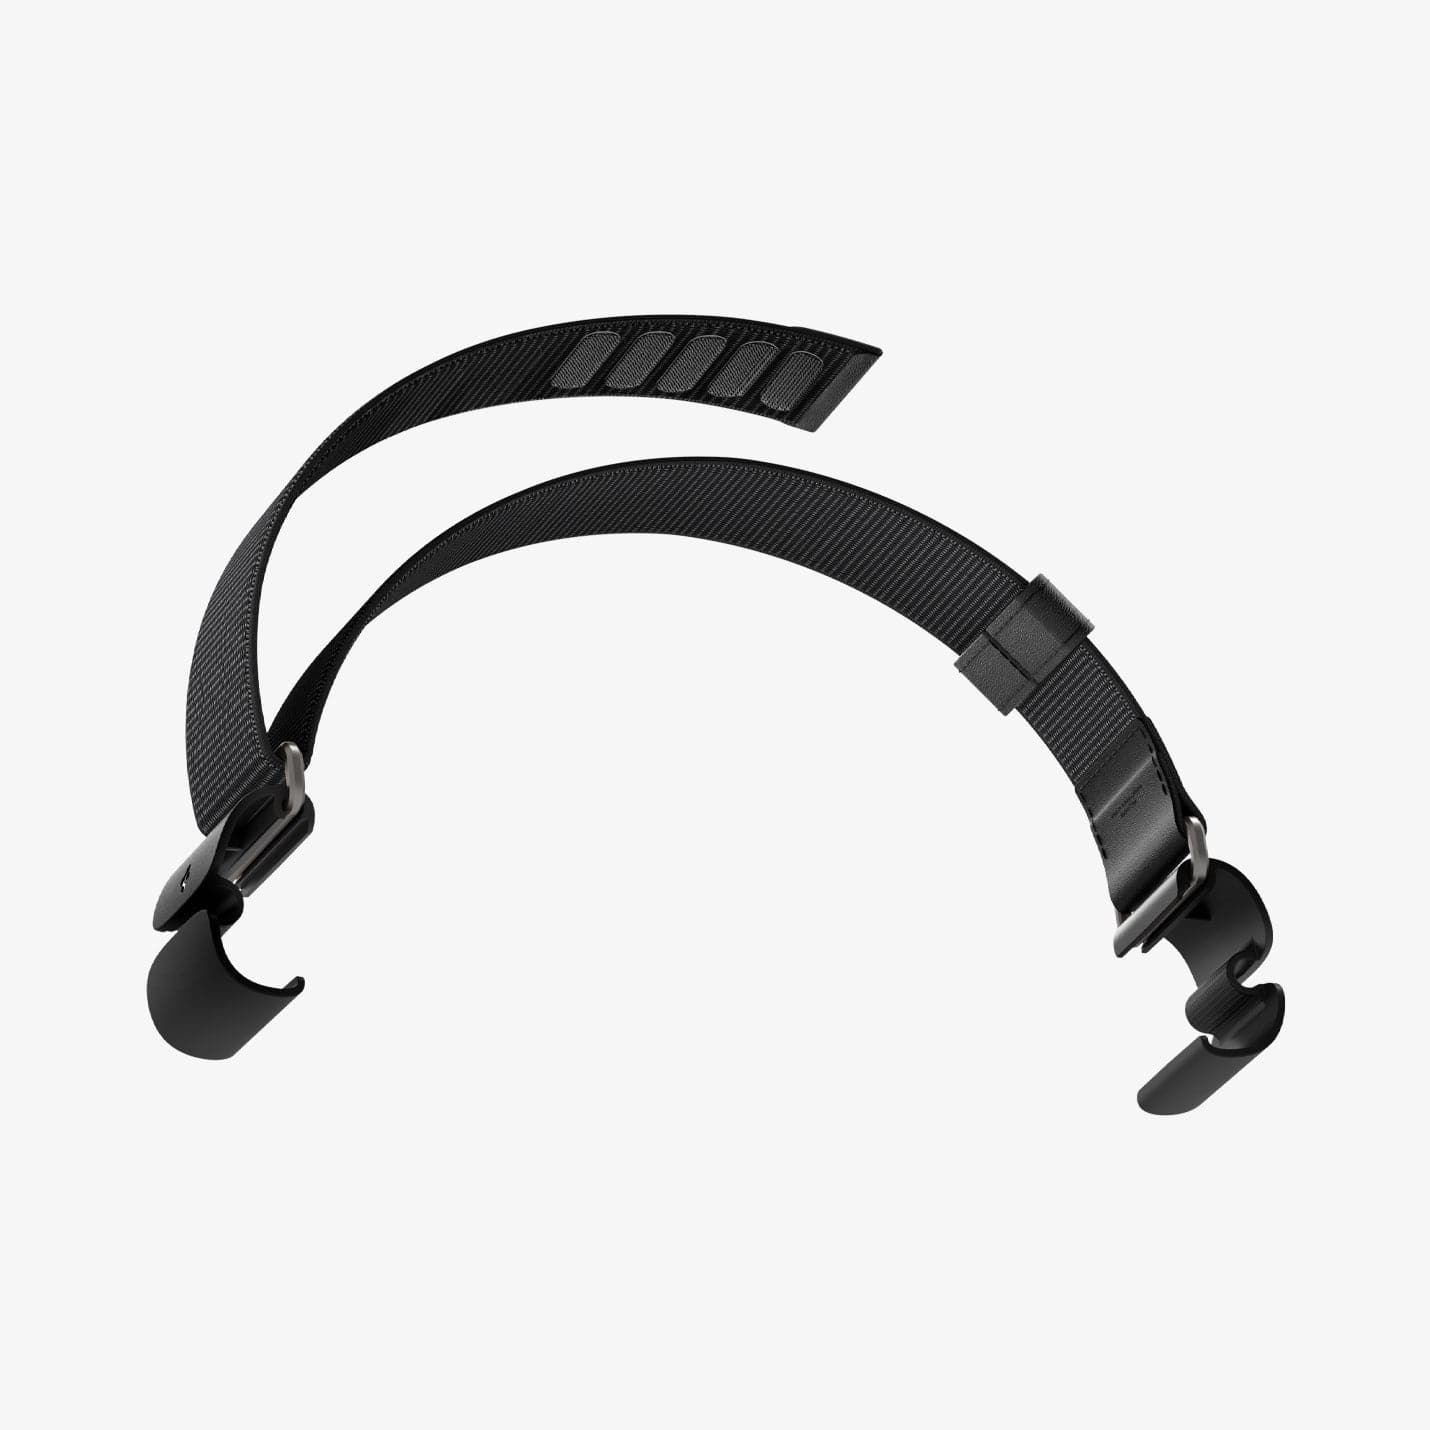 AFA06070 - Meta Quest Pro Head Strap DR200 in black showing the inside of strap